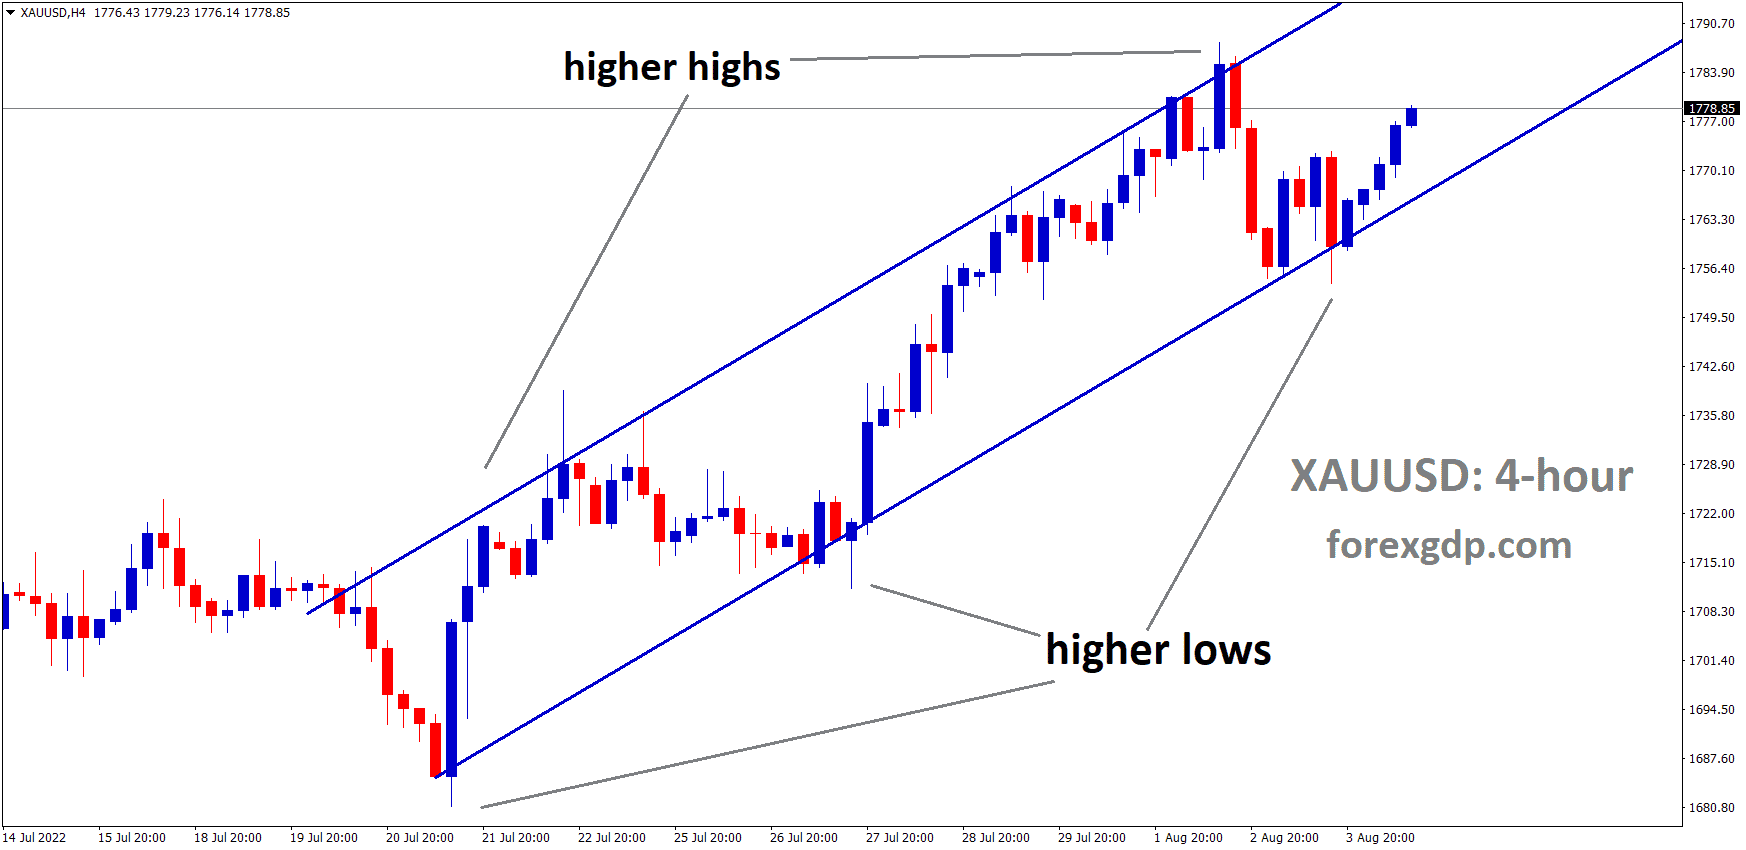 XAUUSD is moving in an Ascending channel and the market has rebounded from the higher low area of the channel